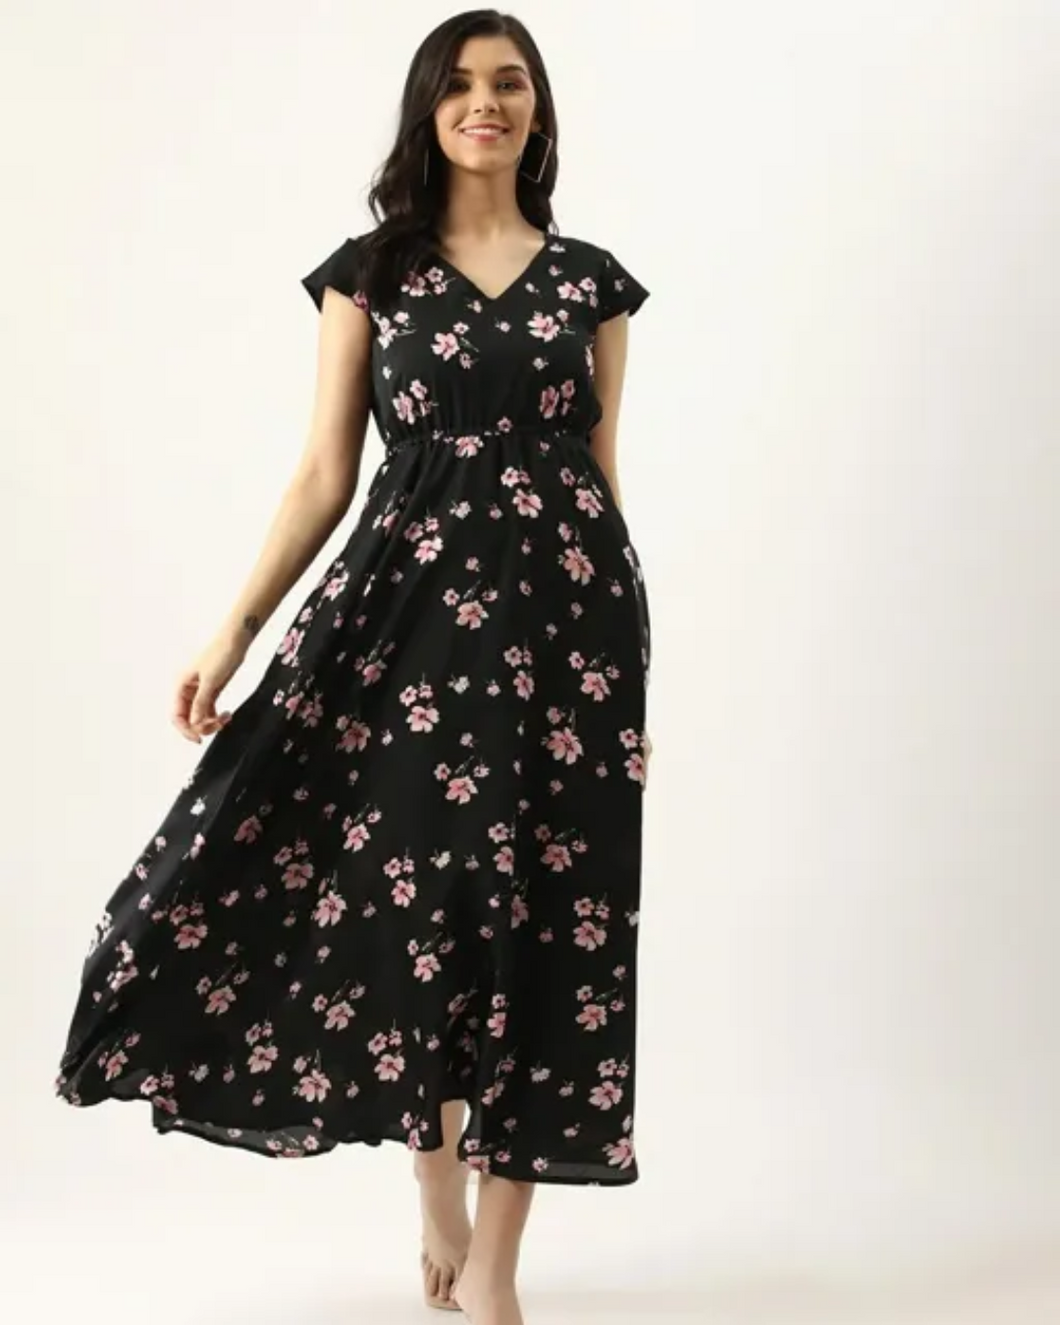 Latest Fashion Women Designer Western Dresses (XS to 7XL Size Available)